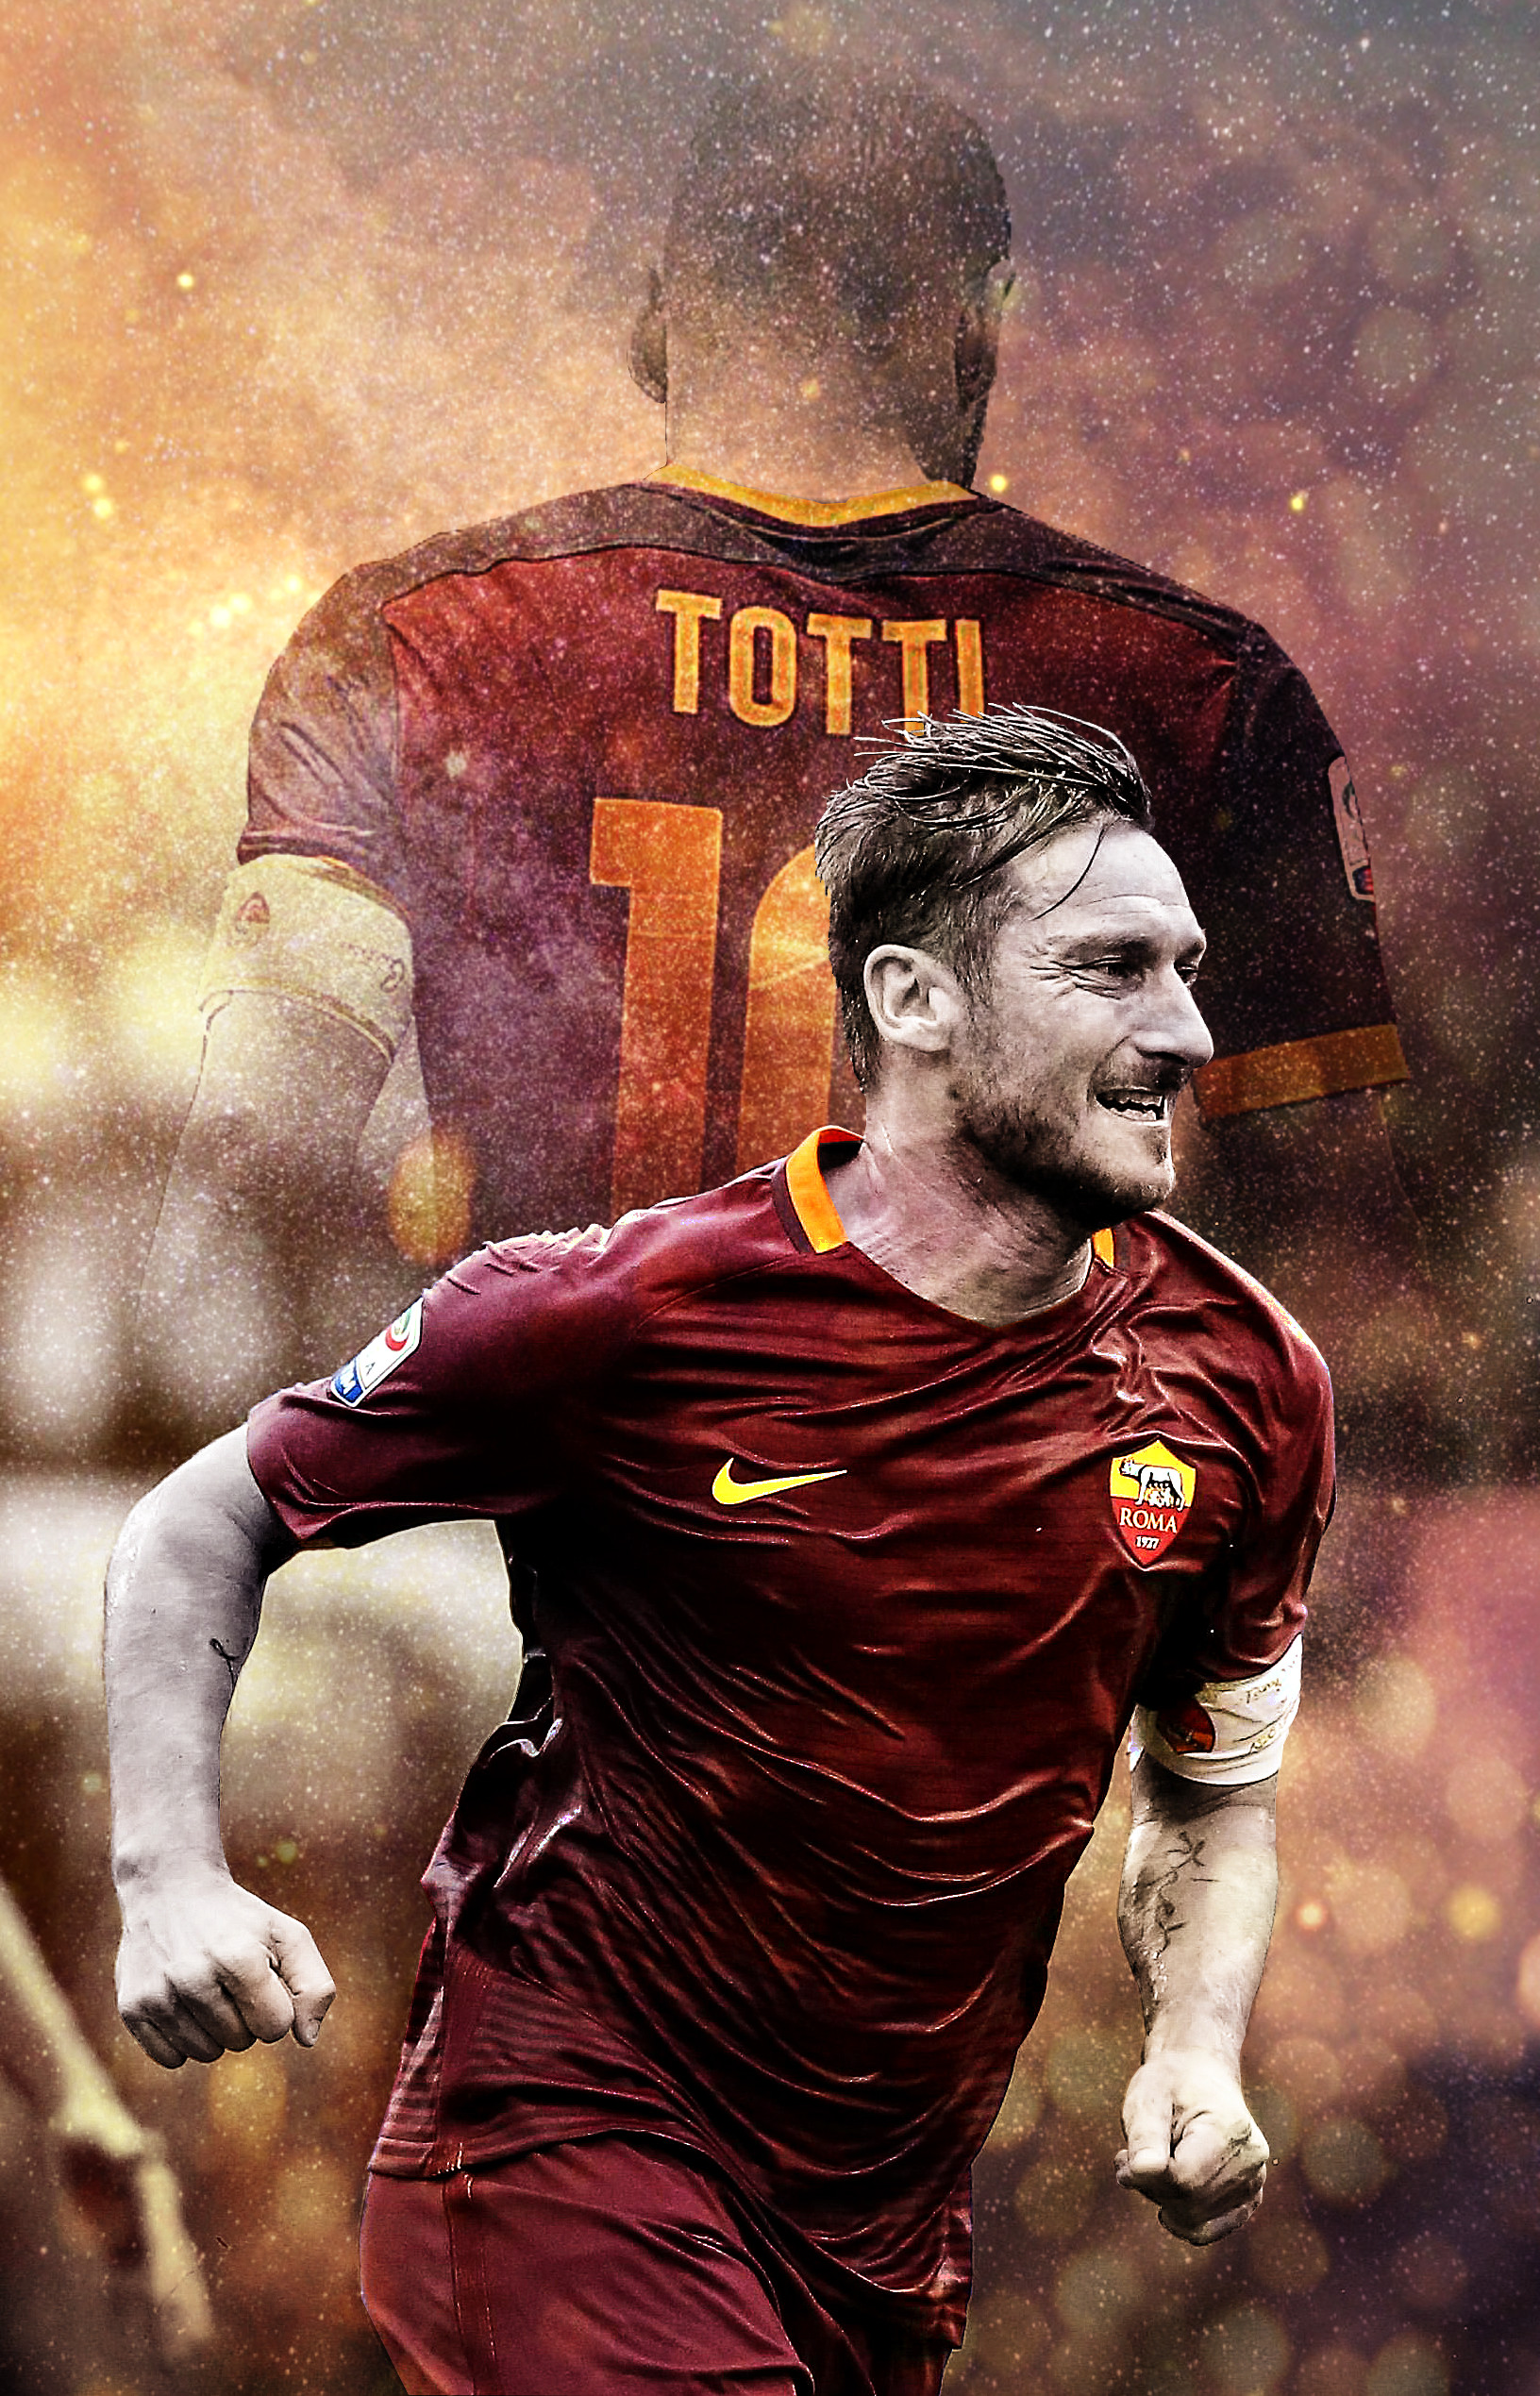 Totti Wallpaper Posted By Samantha Peltier